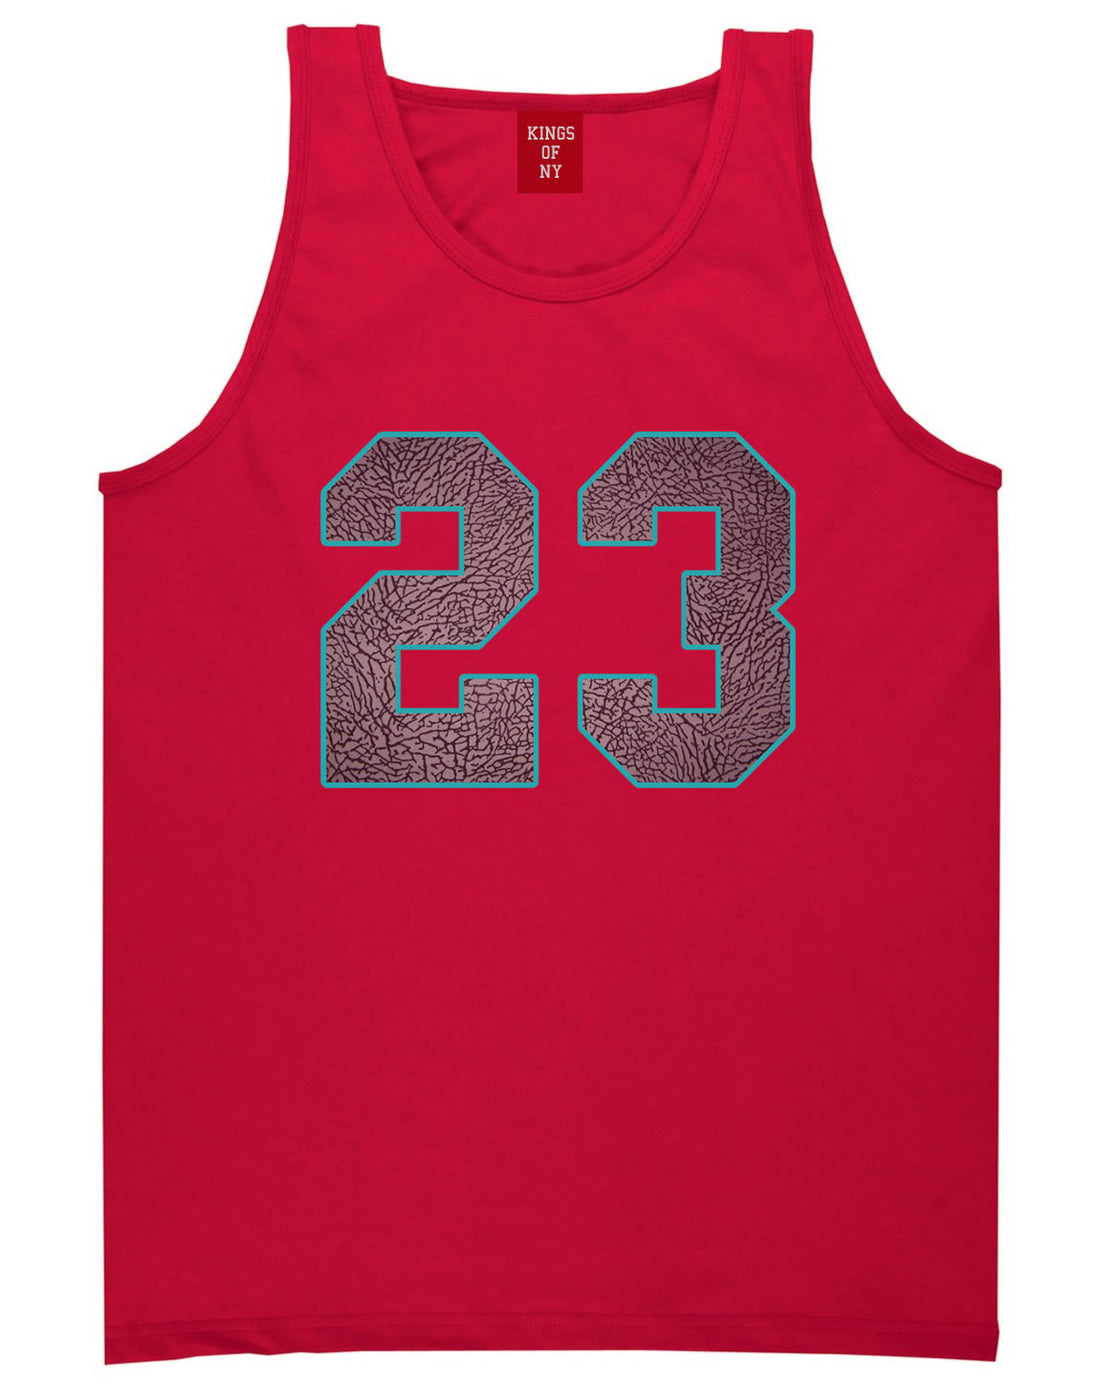 23 Cement Blue Jersey Tank Top in Red By Kings Of NY